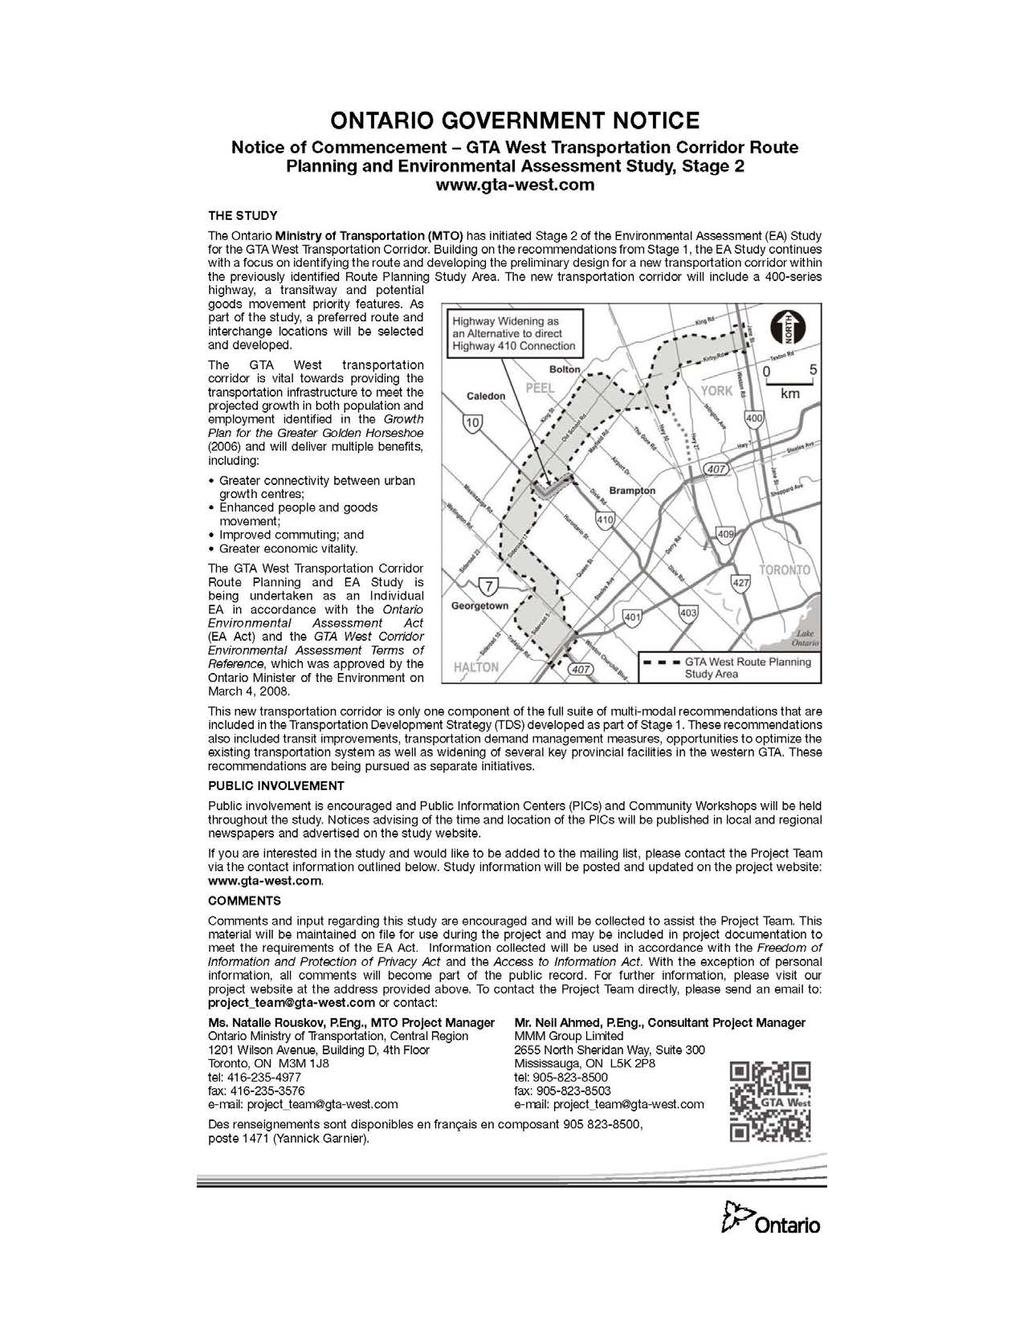 ONTARIO GOVERNMENT NOTICE Notice of Commencement- GTA West Transportation Corridor Route Planning and Environmental Assessment Study, Stage 2 www.gta-west.